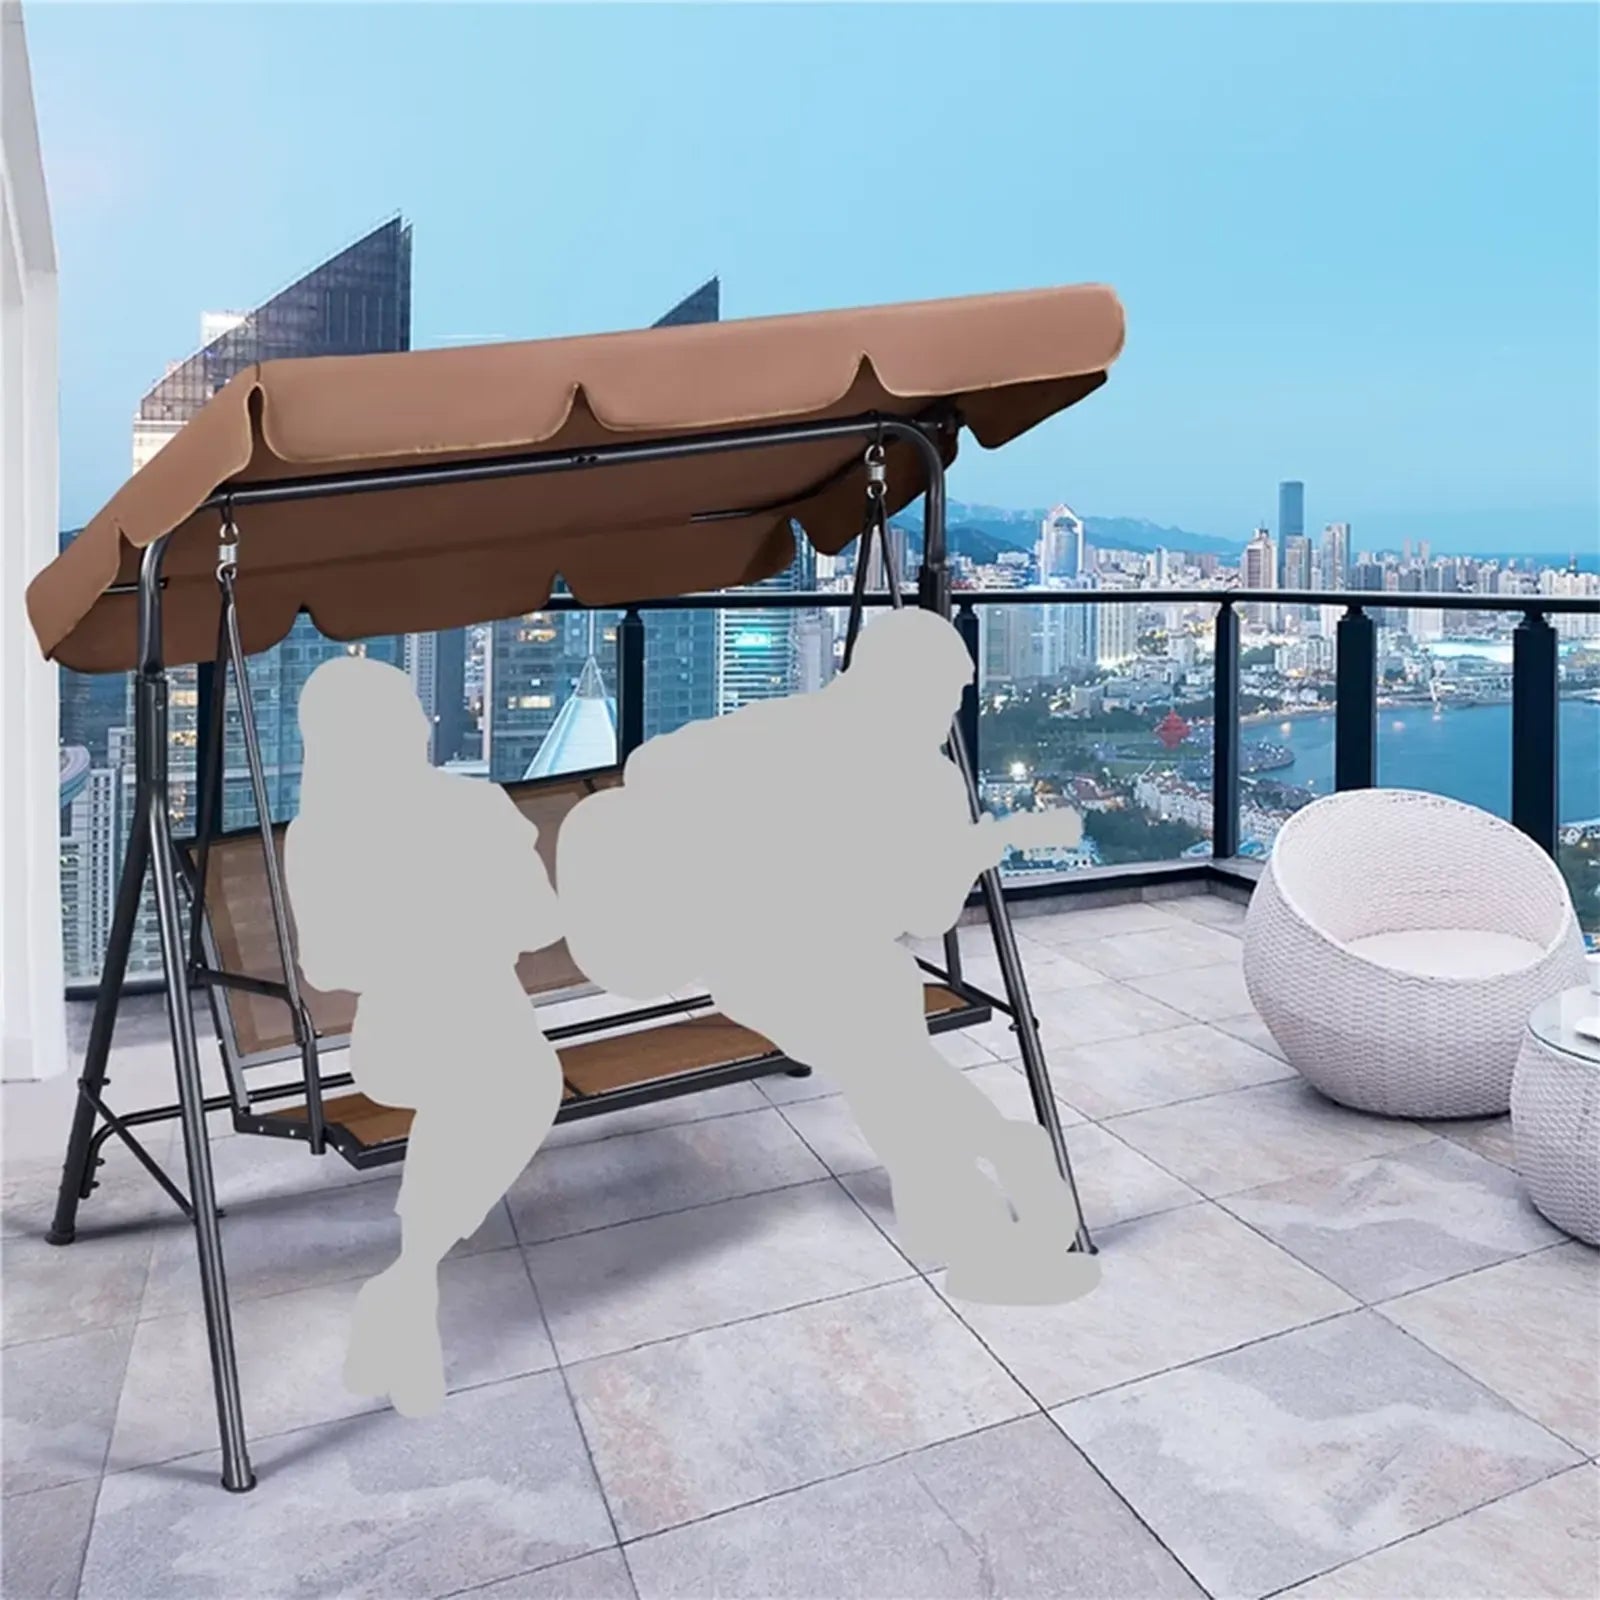 Patio Canopy Porch Hanging 3-Seat Swing Chair for Outdoor